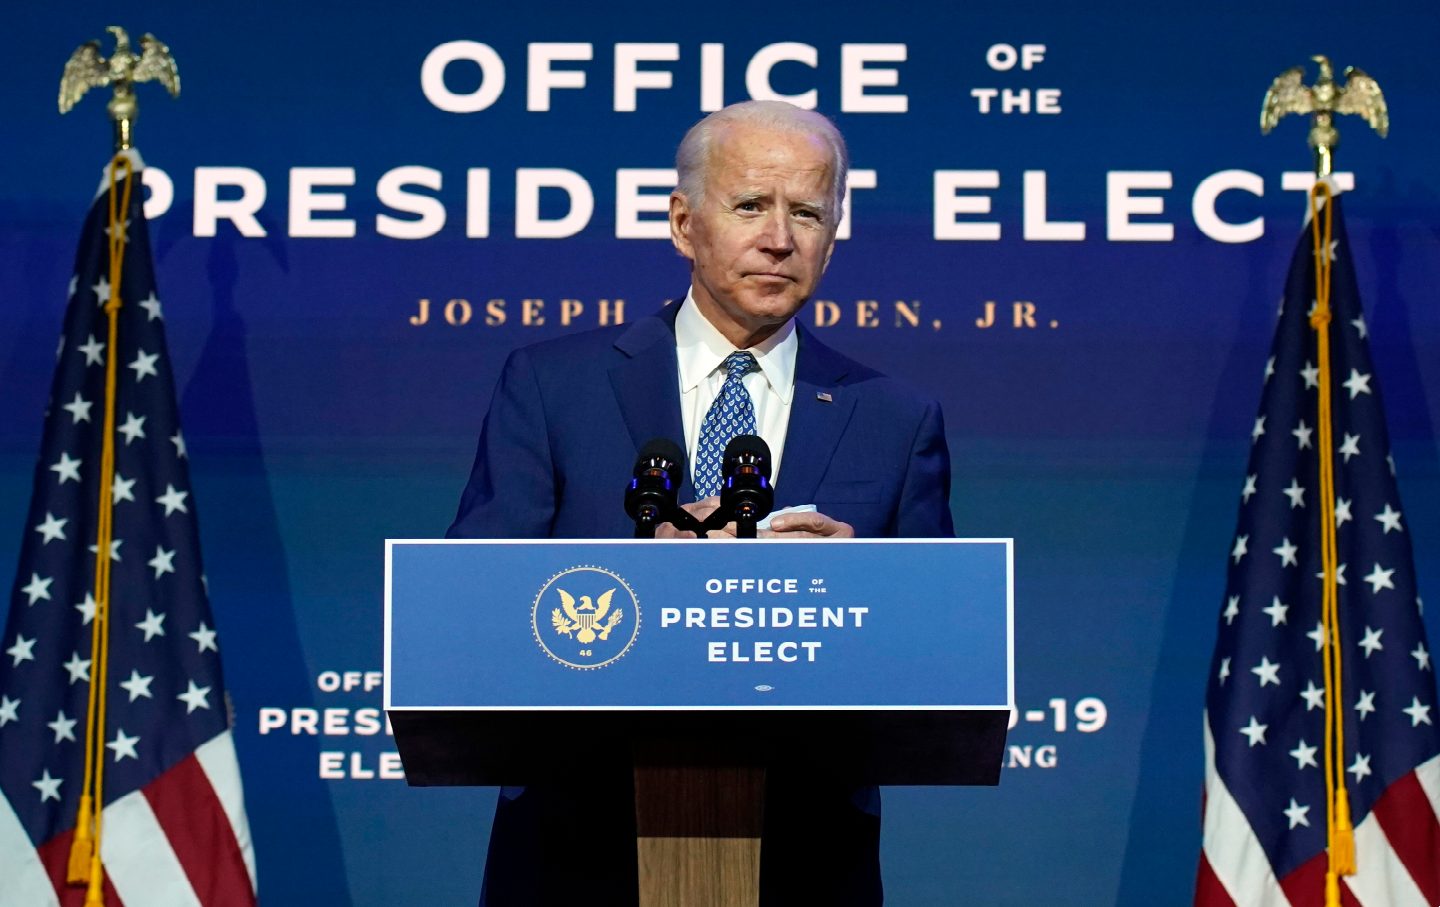 Progressives Have a Bold Agenda. Biden Should Act on Their Priorities in His First 100 Days.